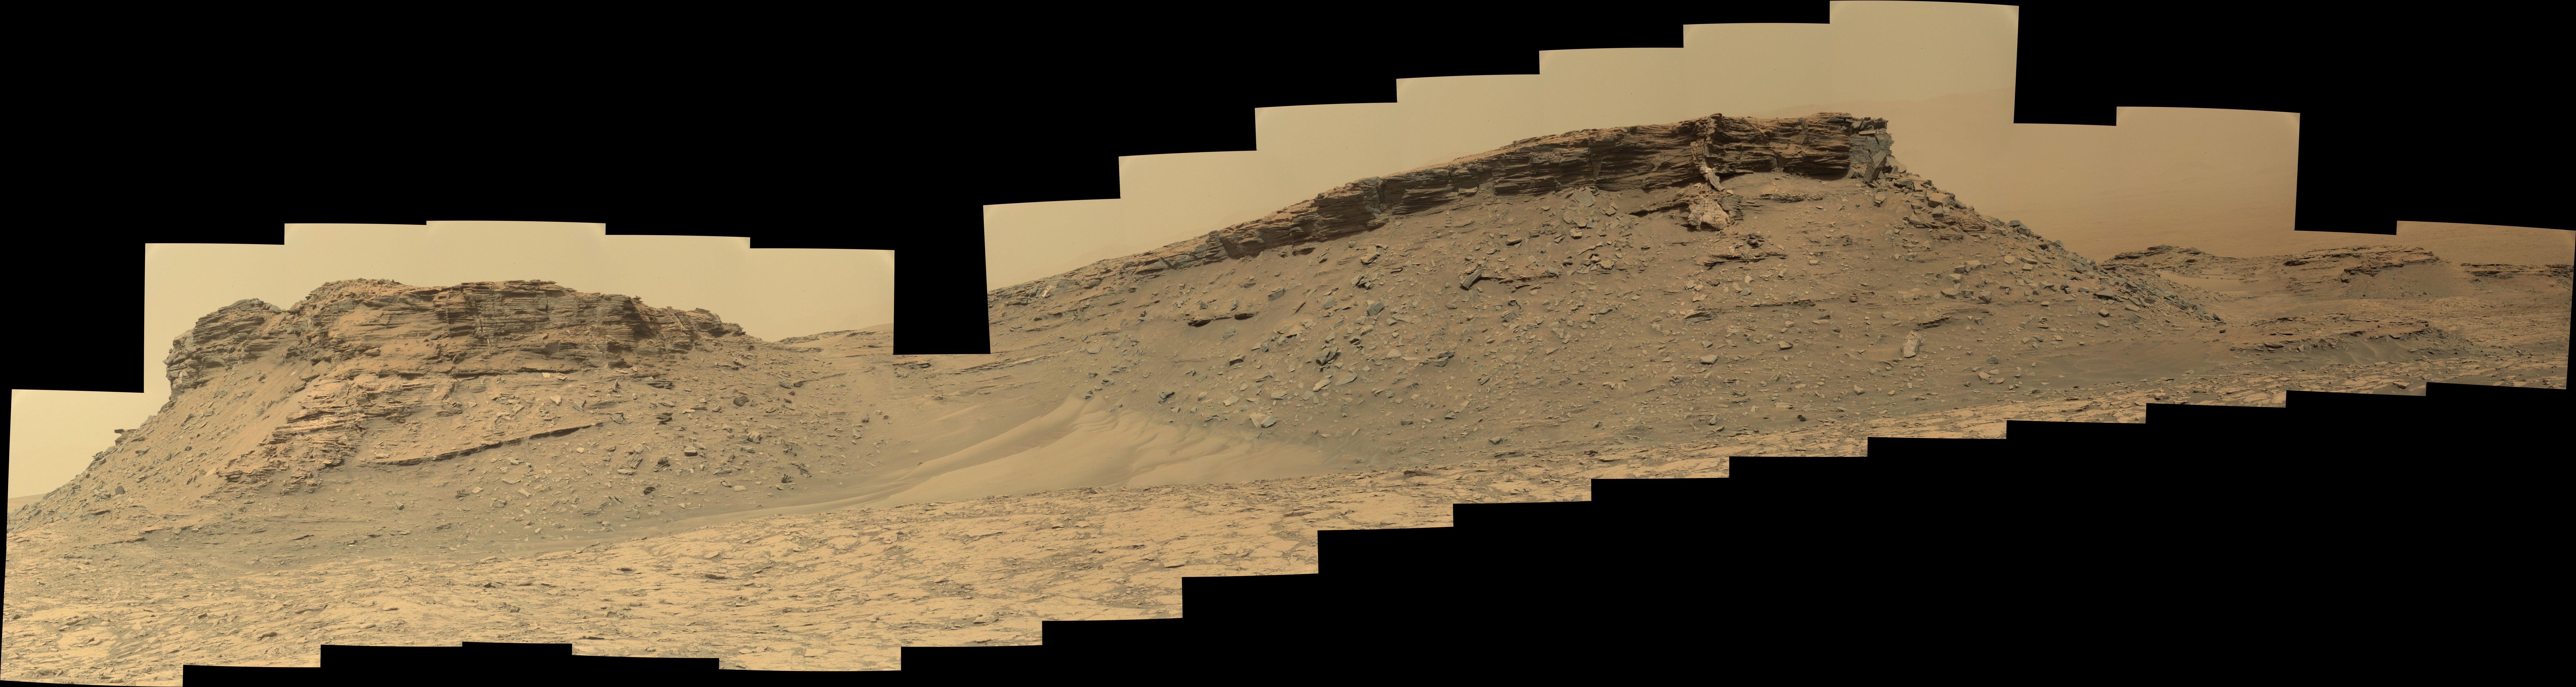 panoramic curiosity rover view 2 - sol 1438 - was life on mars